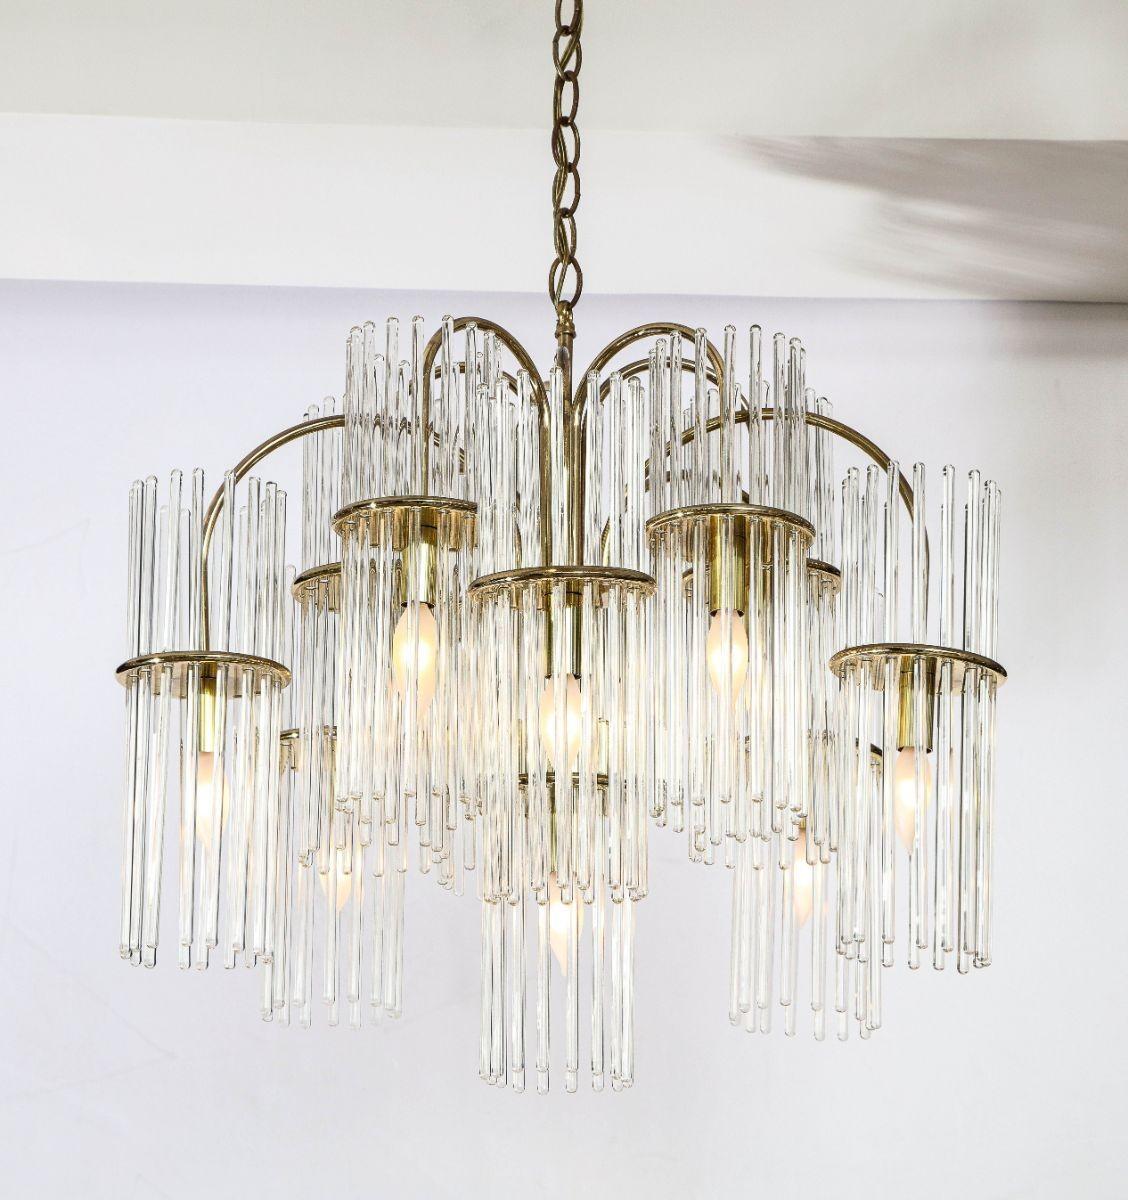 Pair of Glass Rod Chandelier Pendant Lamp by Gaetano Sciolari with ten lights tiered around the central light.